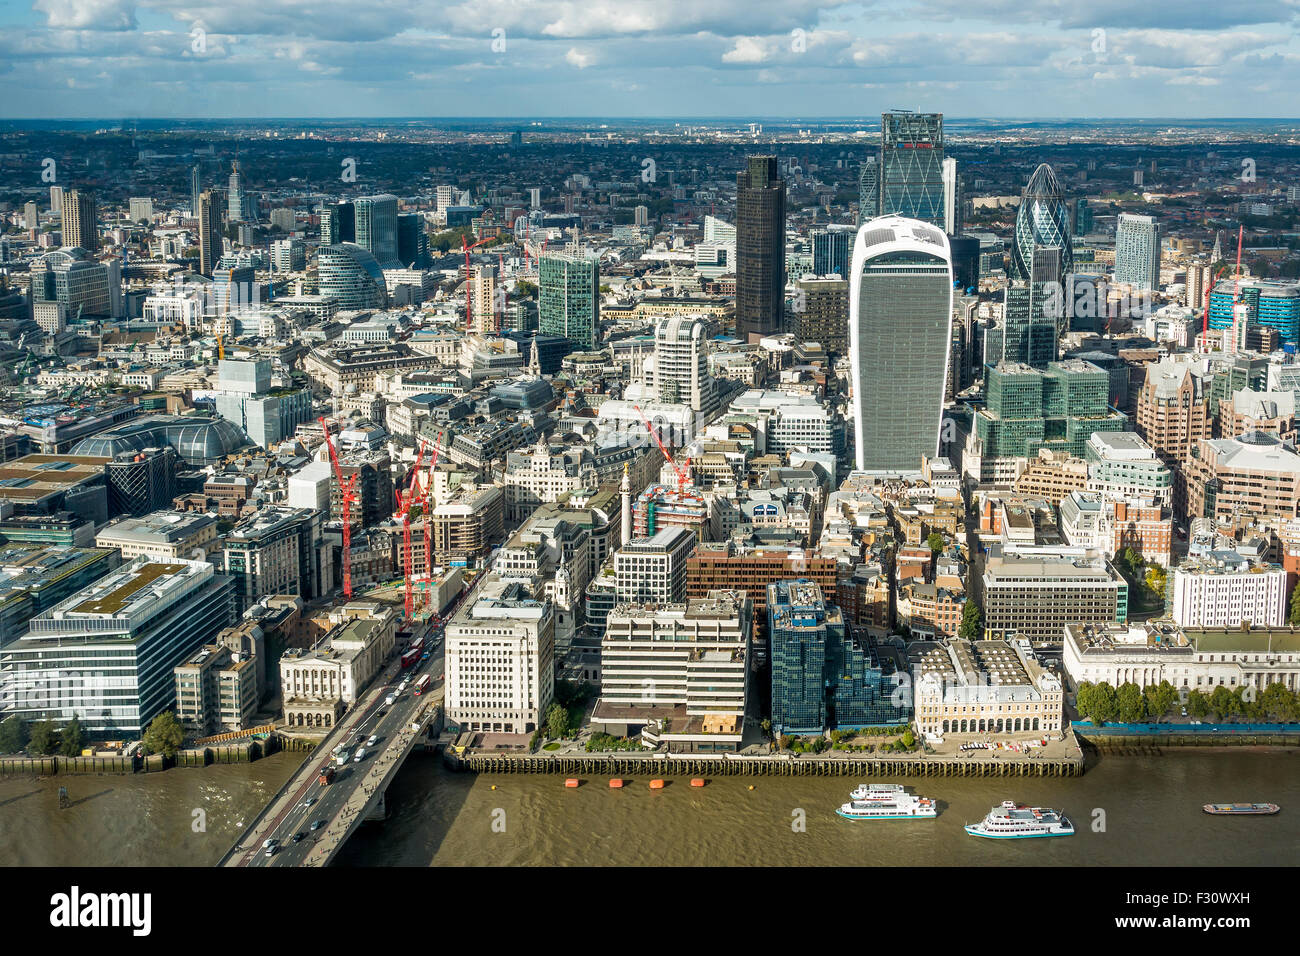 The City Walkie Talkie Gherkin Cheesegrater Buildings River Thames London View from The Shard Stock Photo